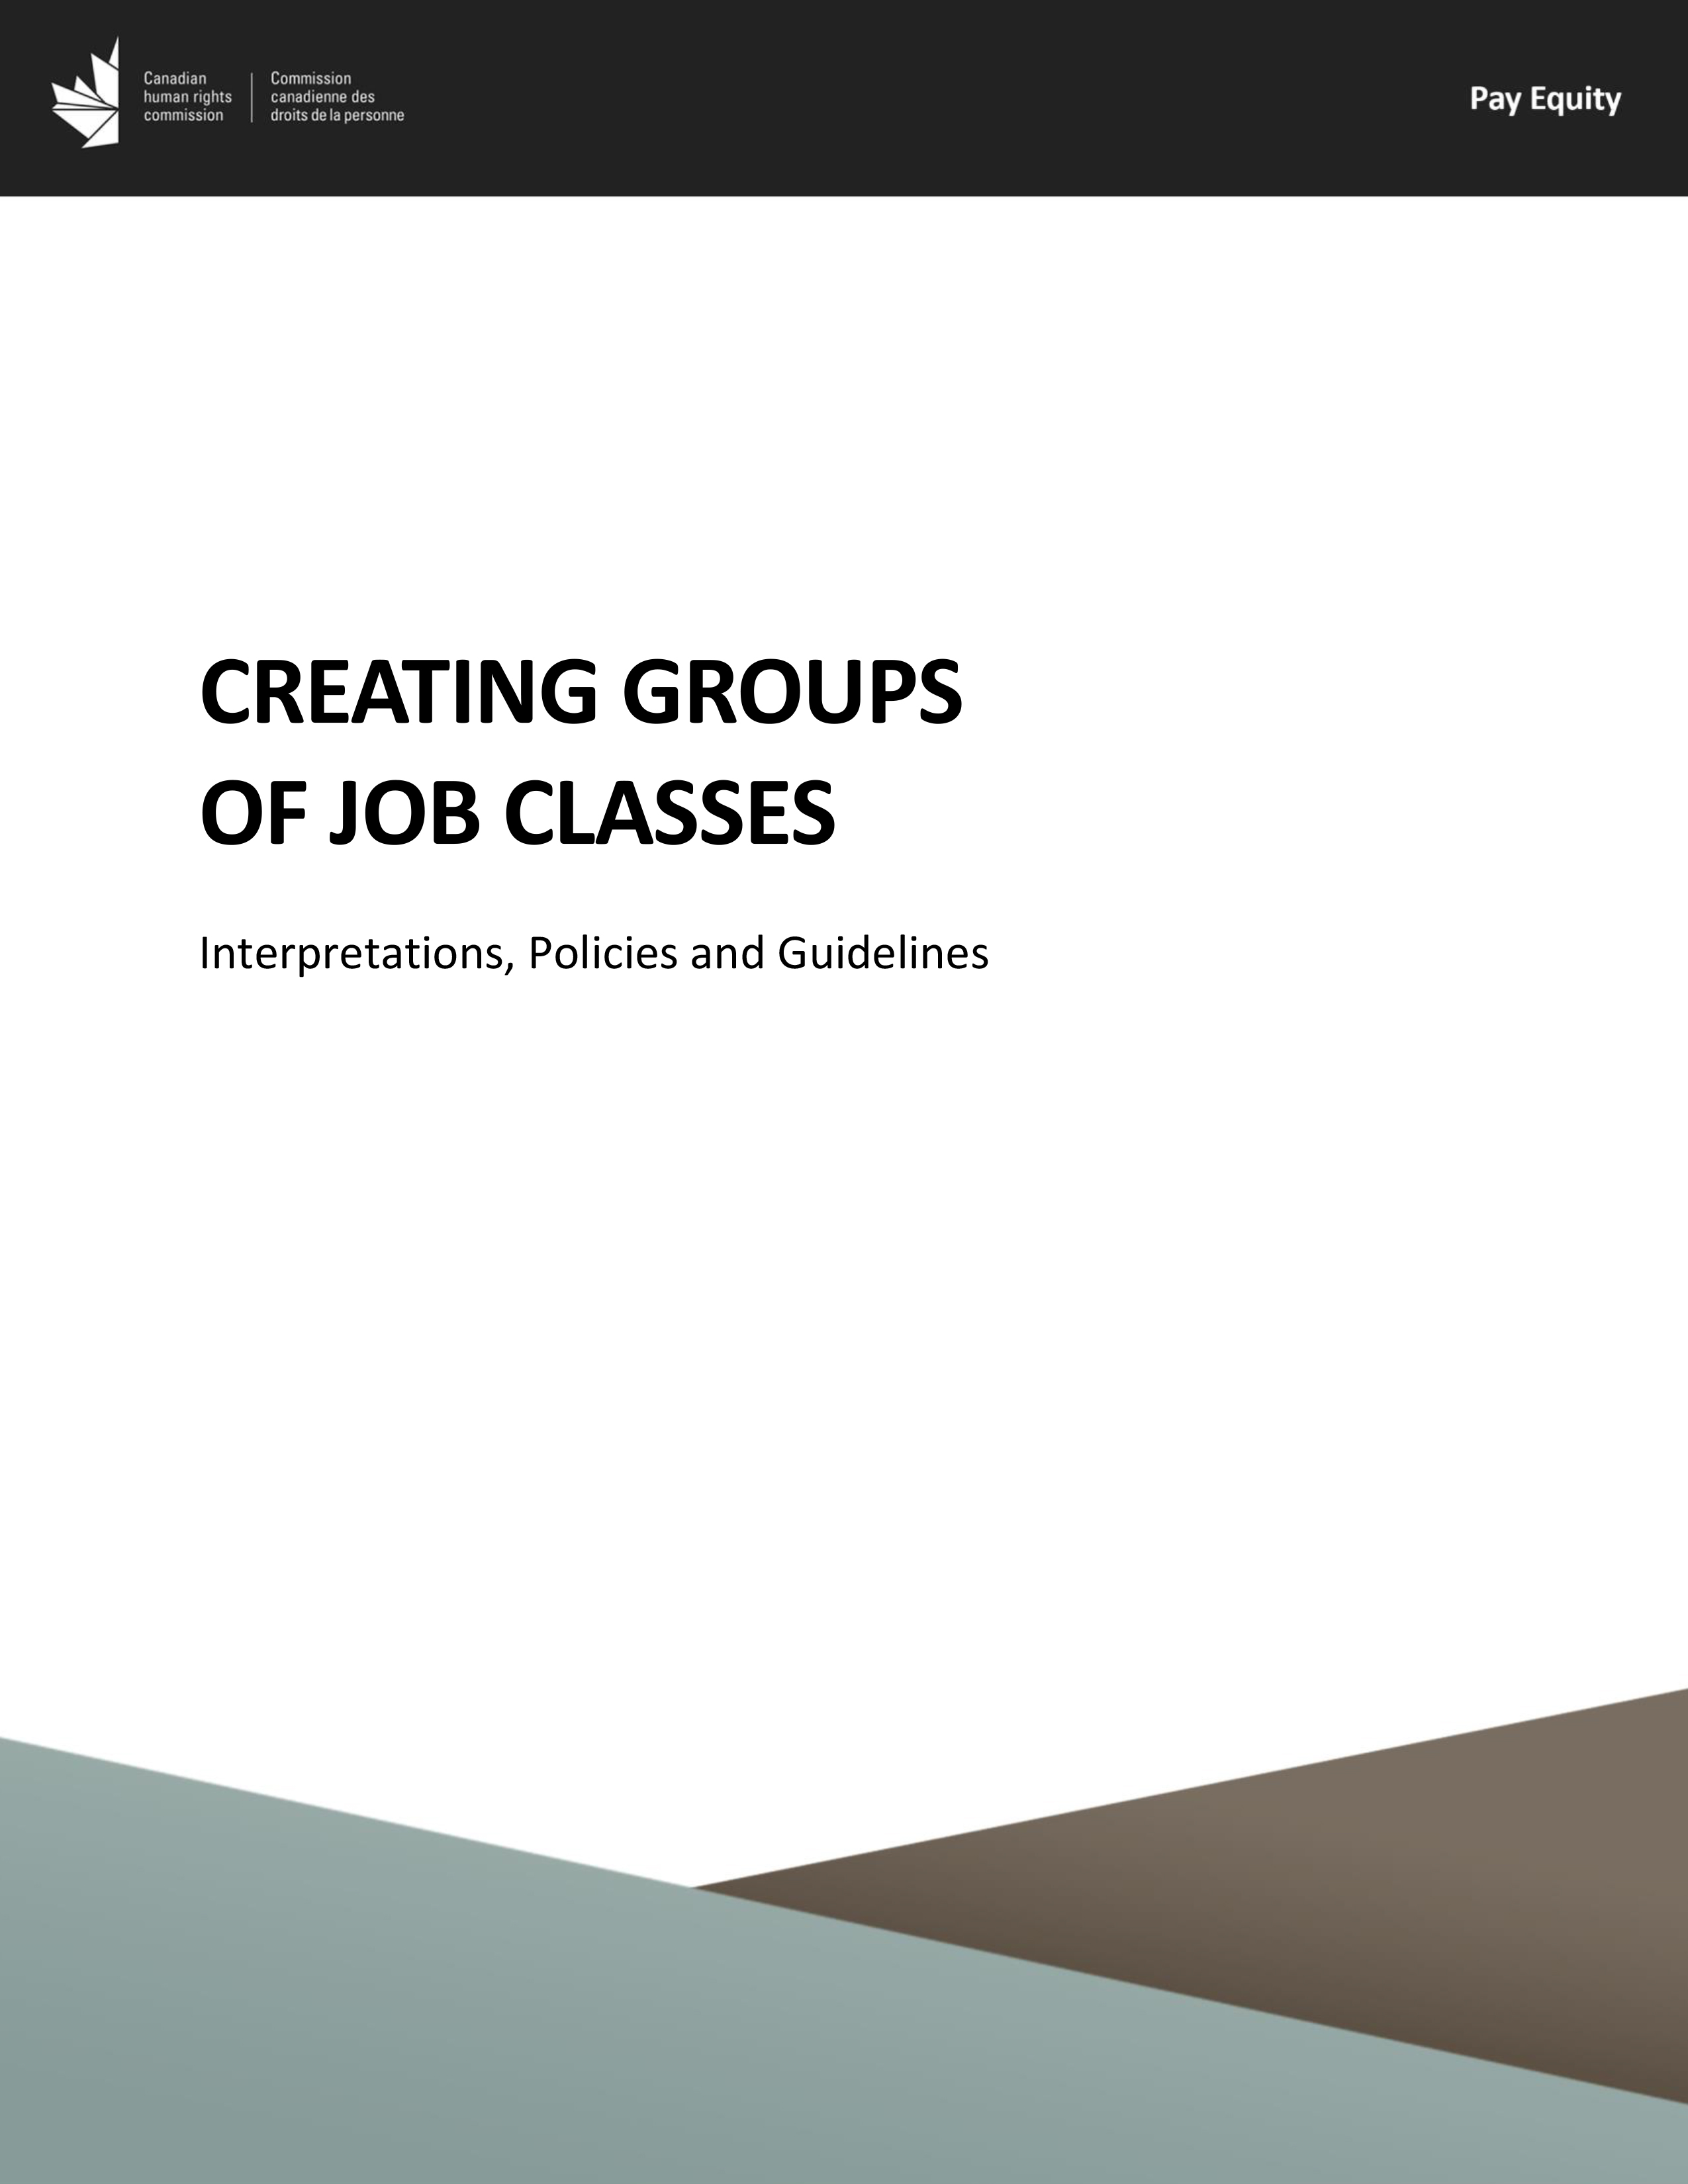 Creating groups of job classes - Interpretations, Policies and Guidelines